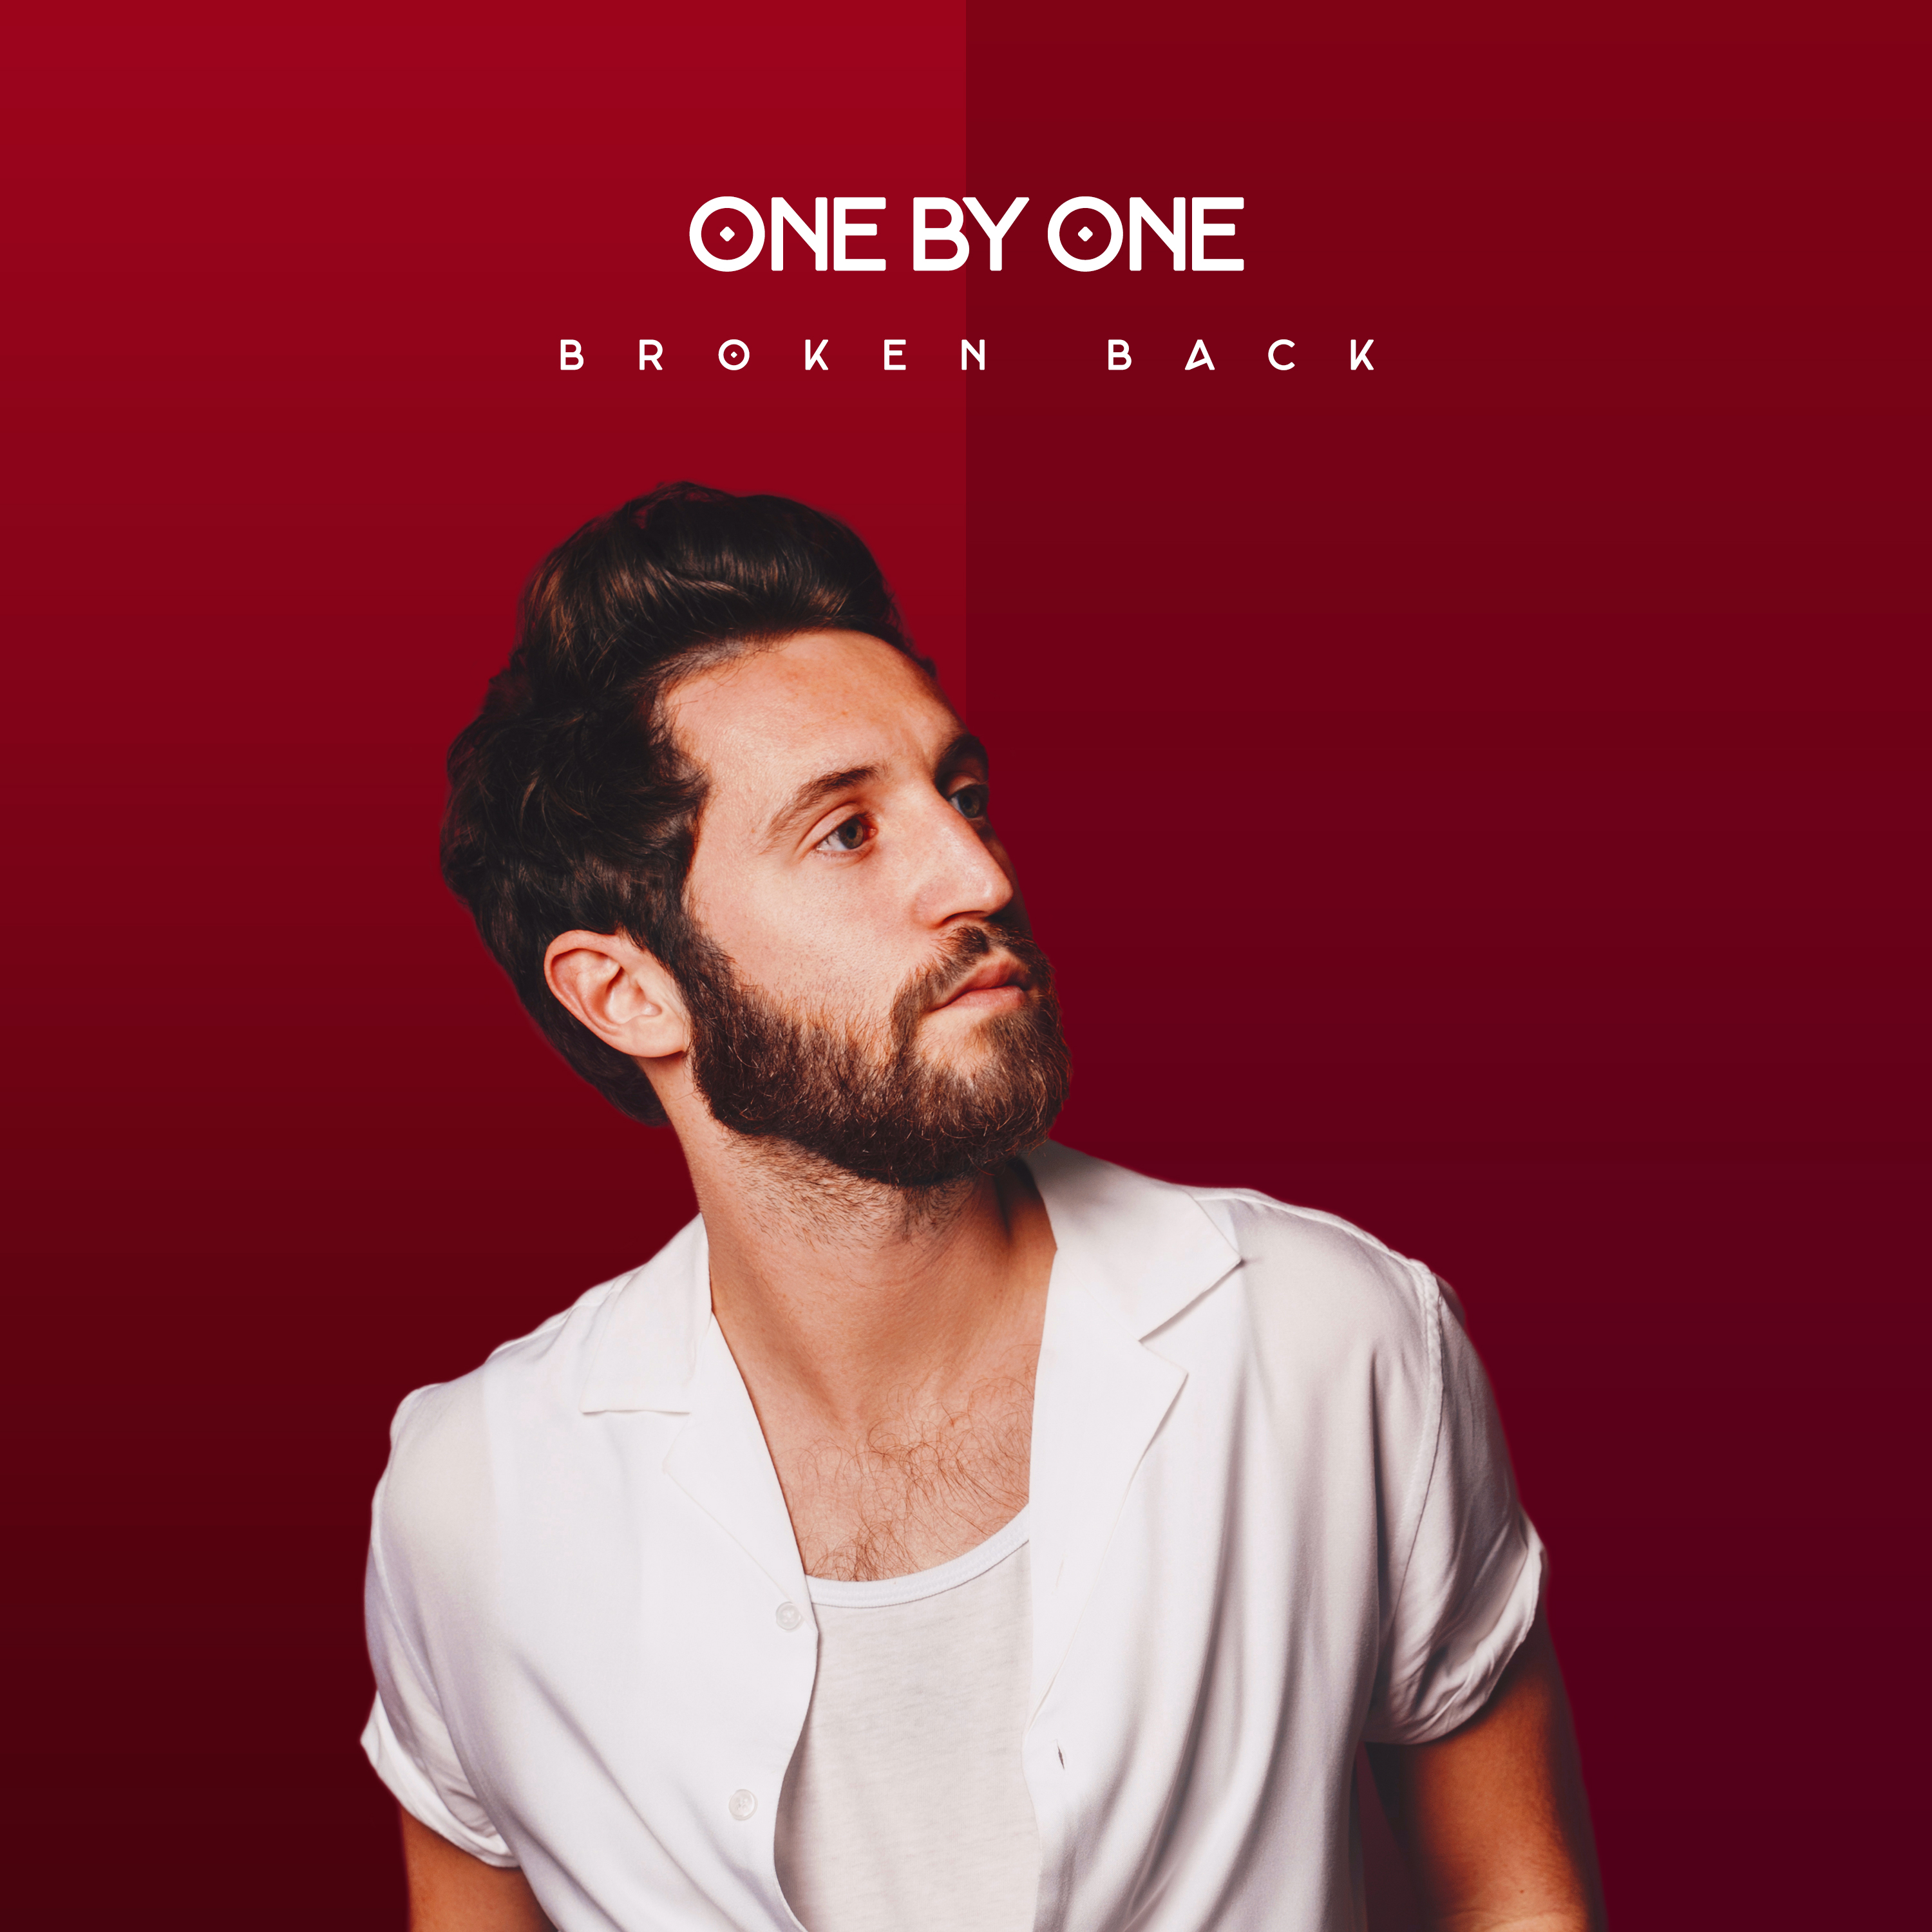 Broken Back and Alle Farben Align On Well-Supported Single “One By One”